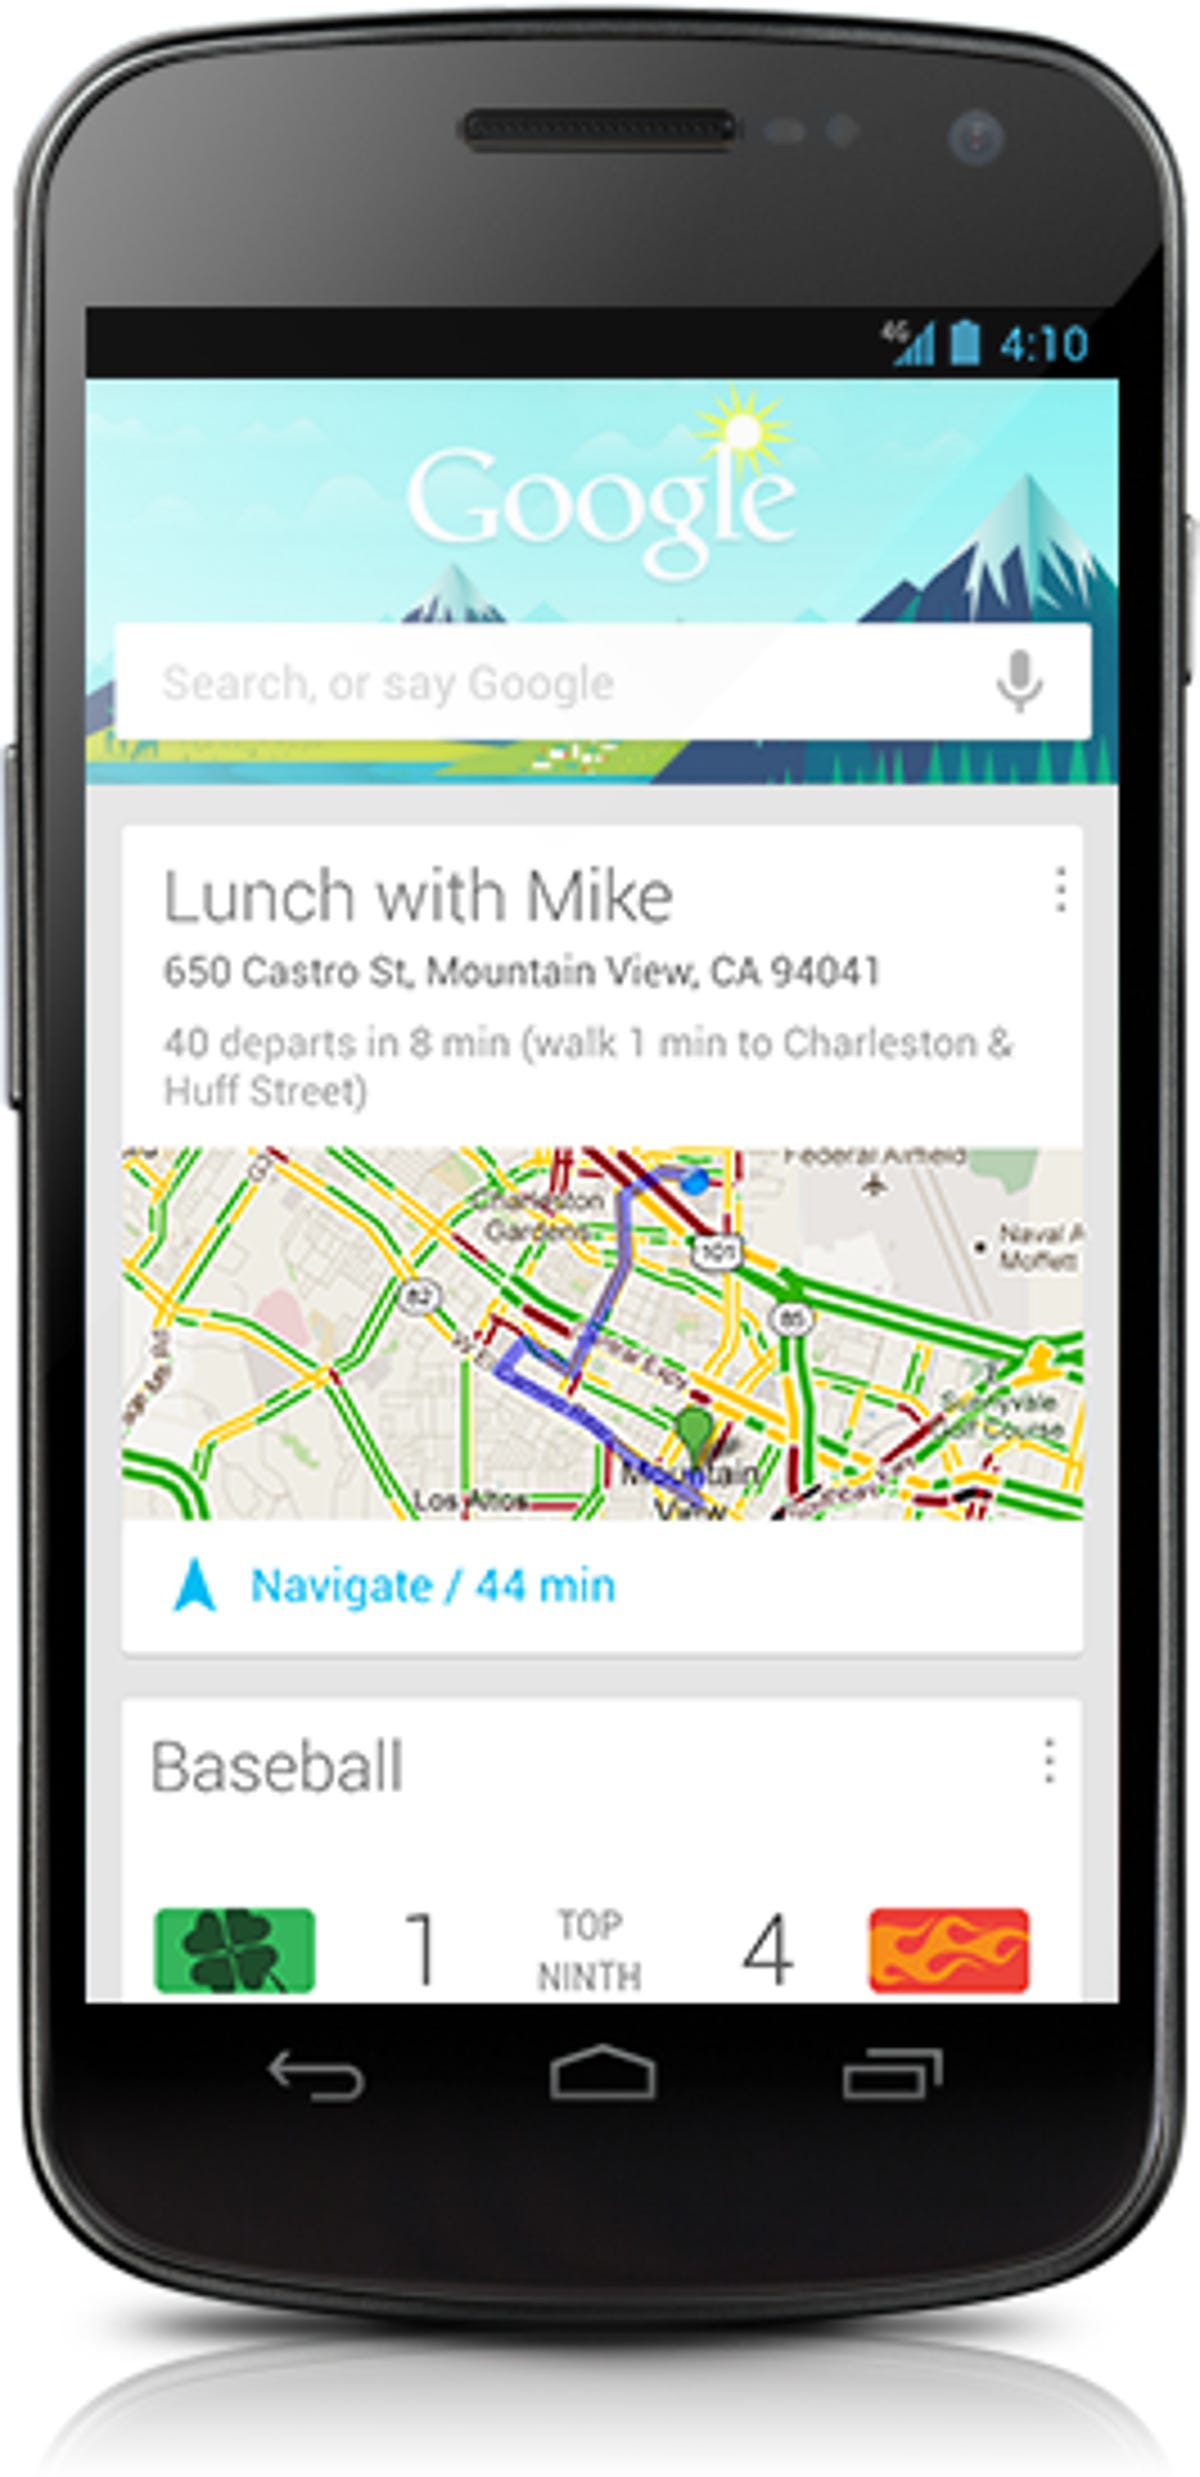 Google Now attempts to present relevant information, automatically, when you need it. Examples here include a meeting and results from a game.